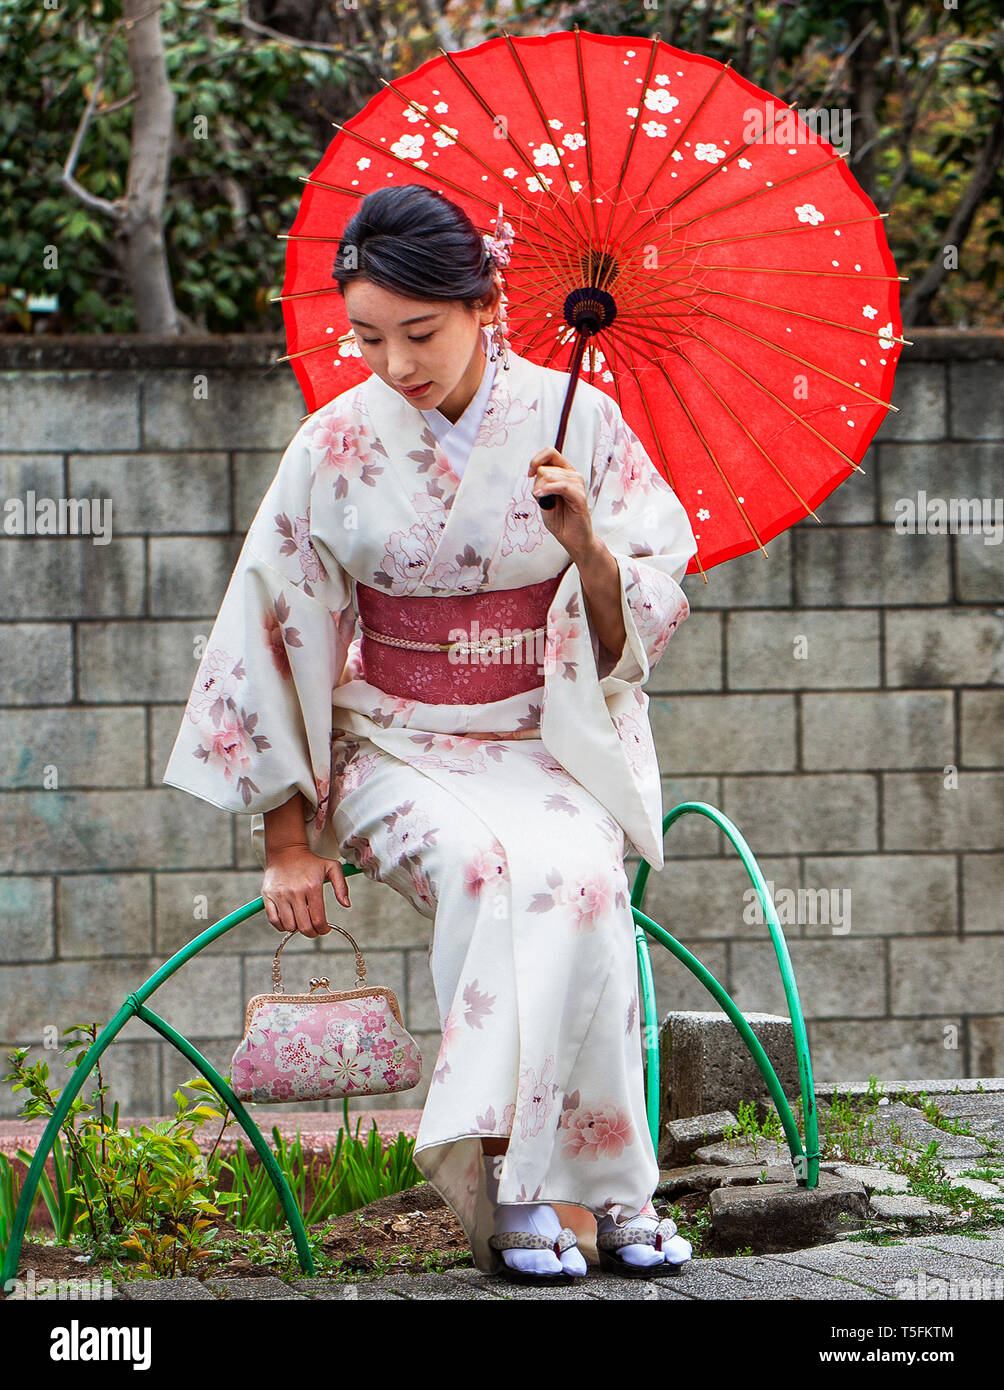 Beautiful Japanese woman in white kimono with red sash and red umbrella in a park next to a cherry blossom tree Stock Photo